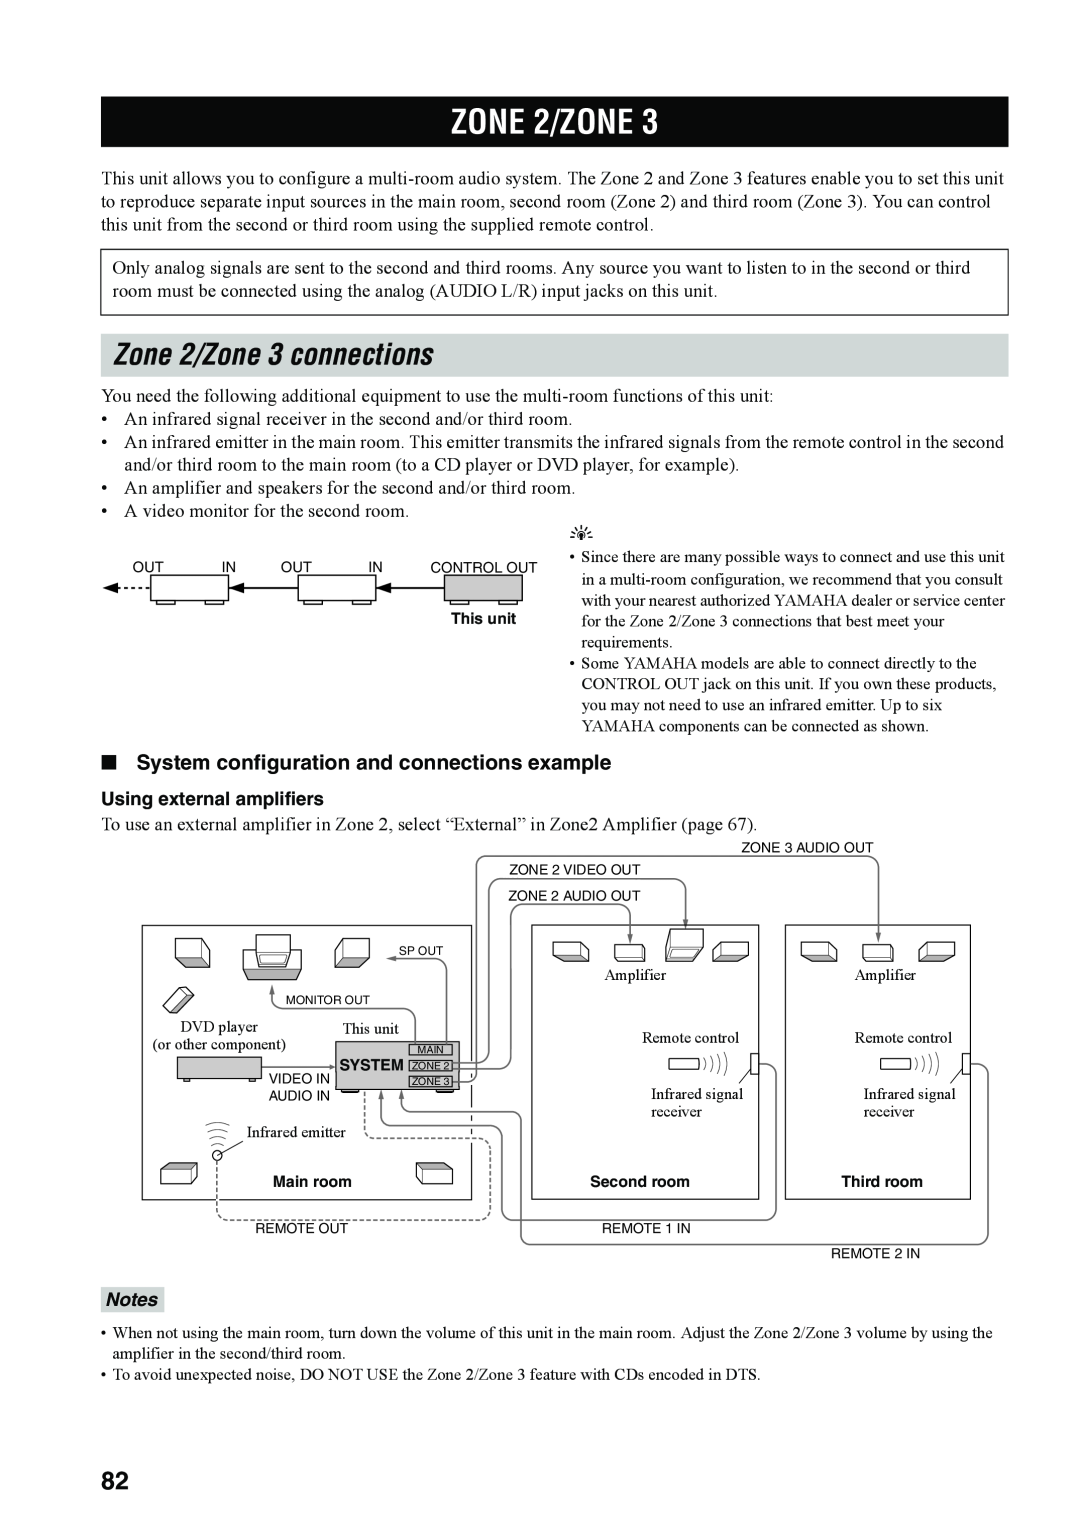 Yamaha RX-V4600 owner manual ZONE 2/ZONE, Zone 2/Zone 3 connections, System configuration and connections example 